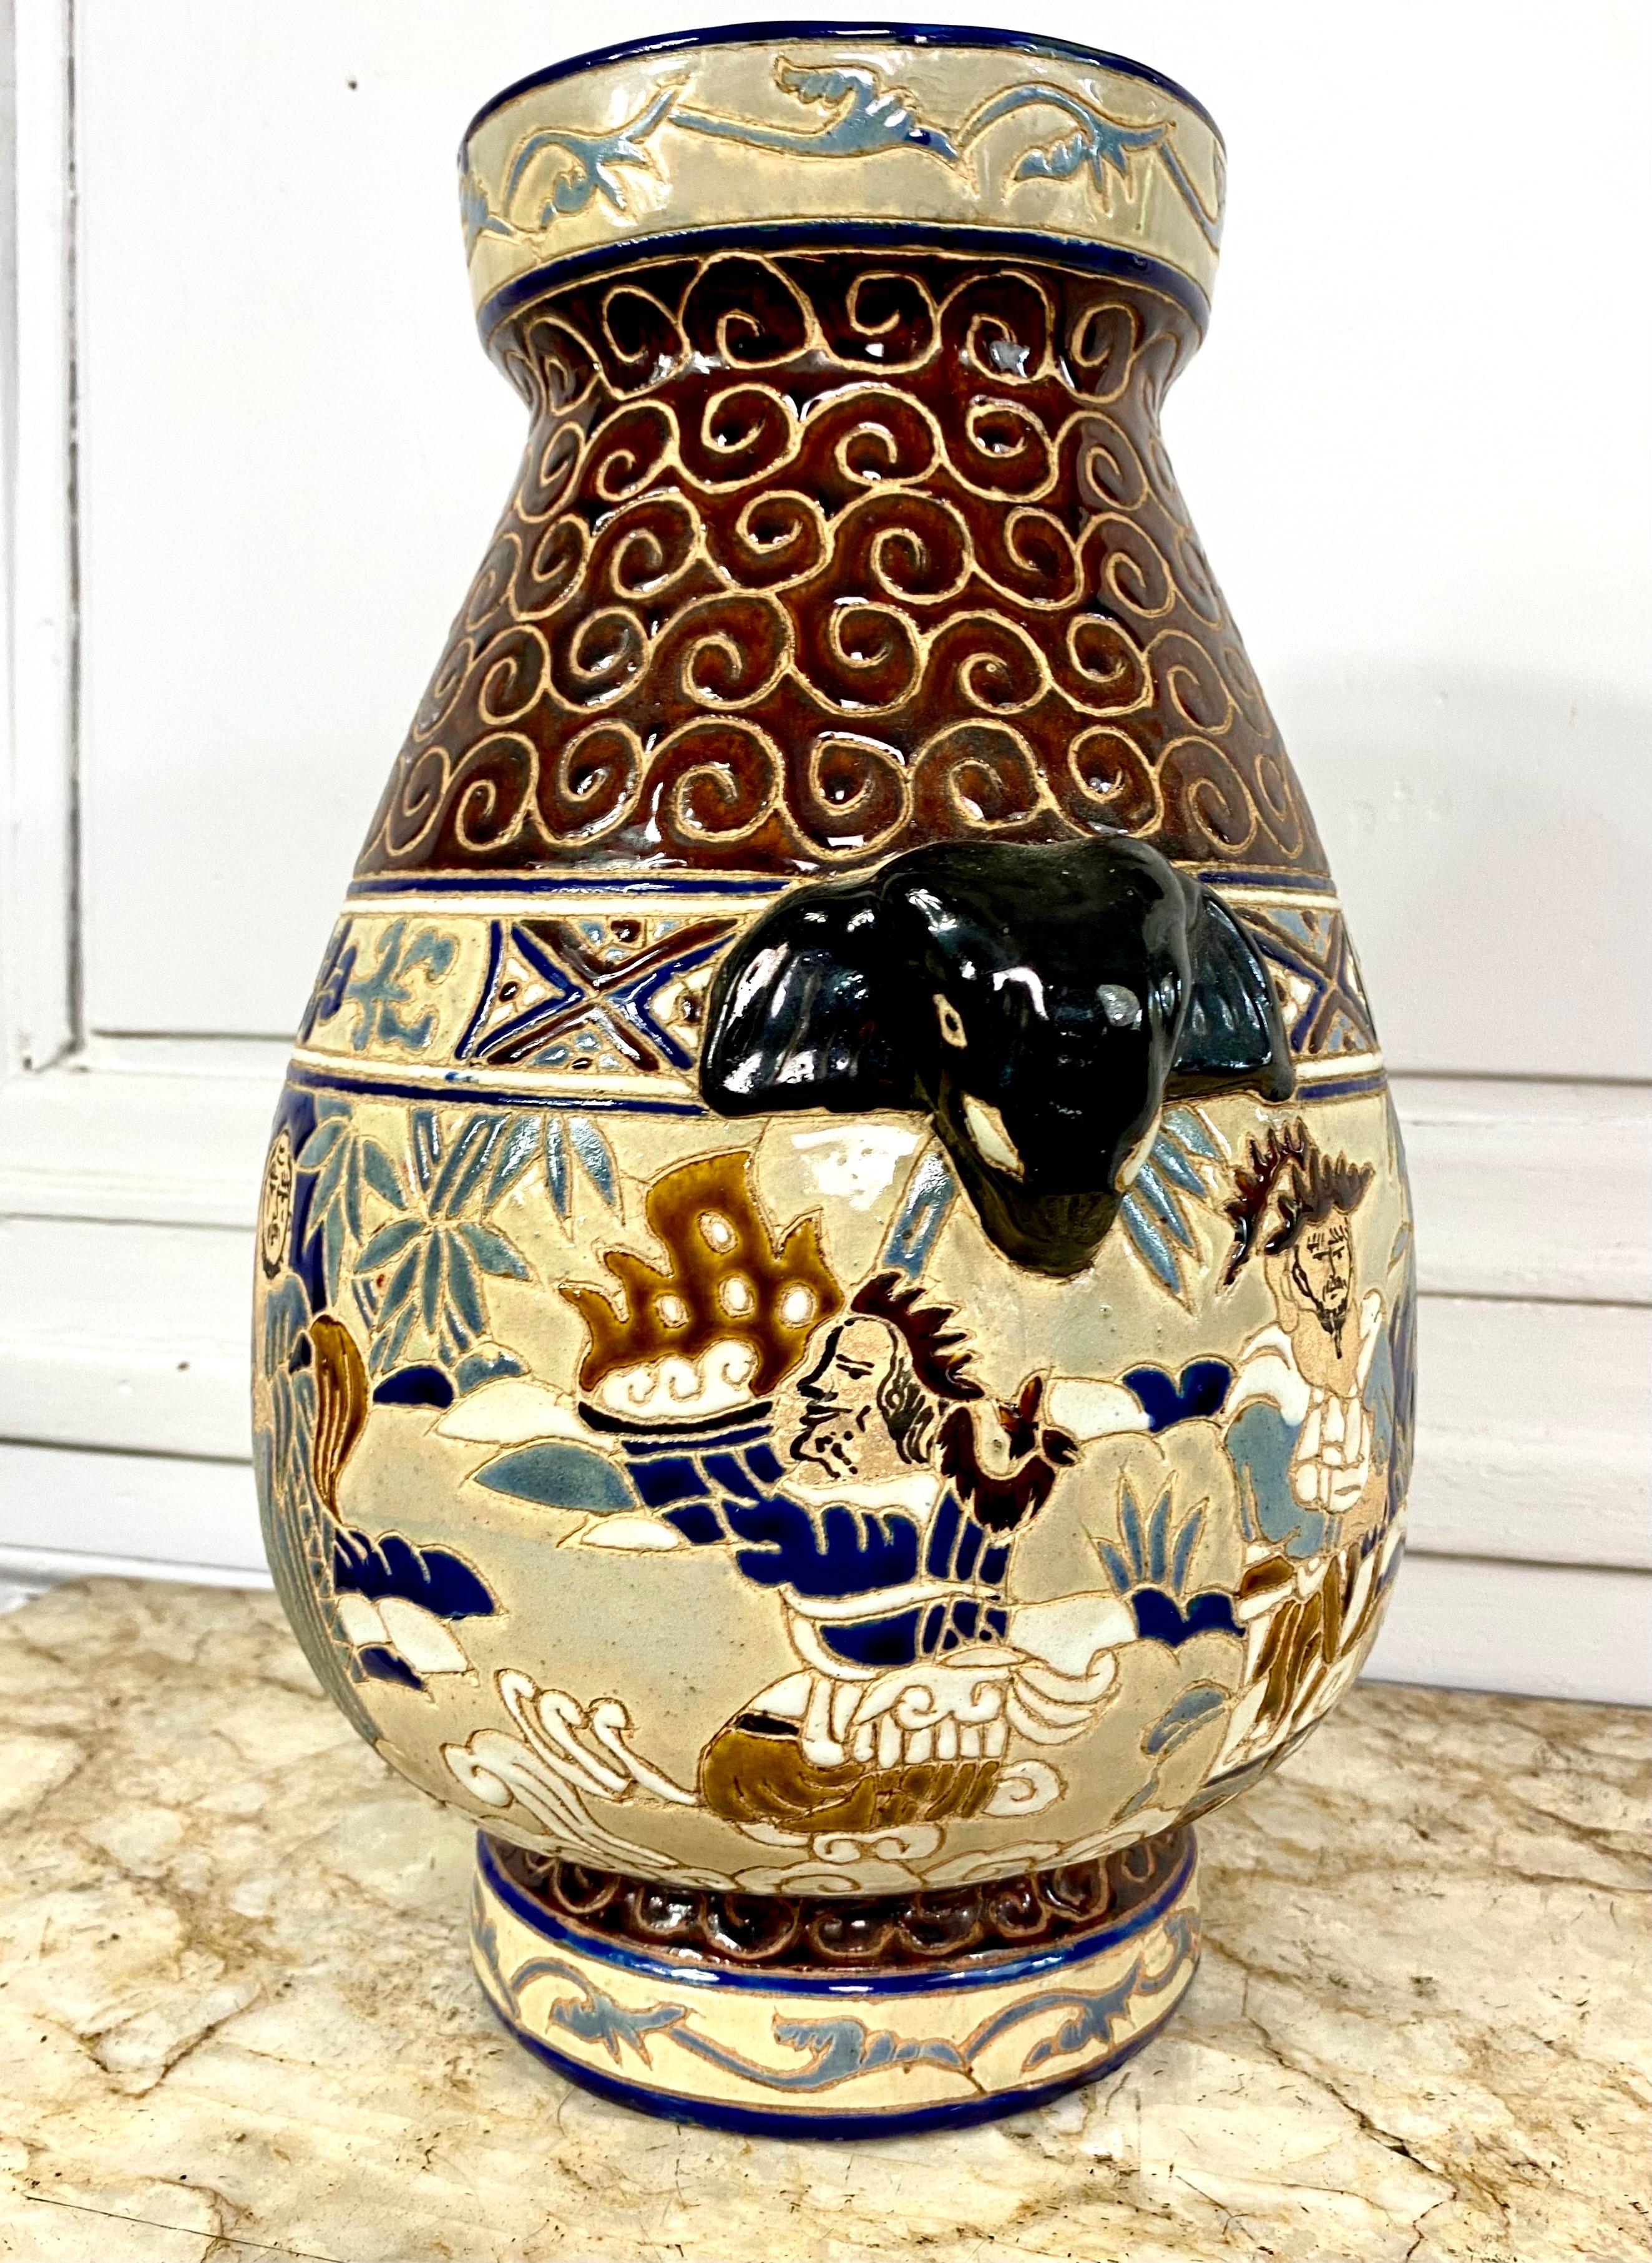 Glazed ceramic vase from the Bien-hoa school, decorated with six sages of the Taoist tradition. The handles are in the shape of black enamelled elephant heads. The upper part of the vase is in brown enamel decorated with scrolls. The mark under the